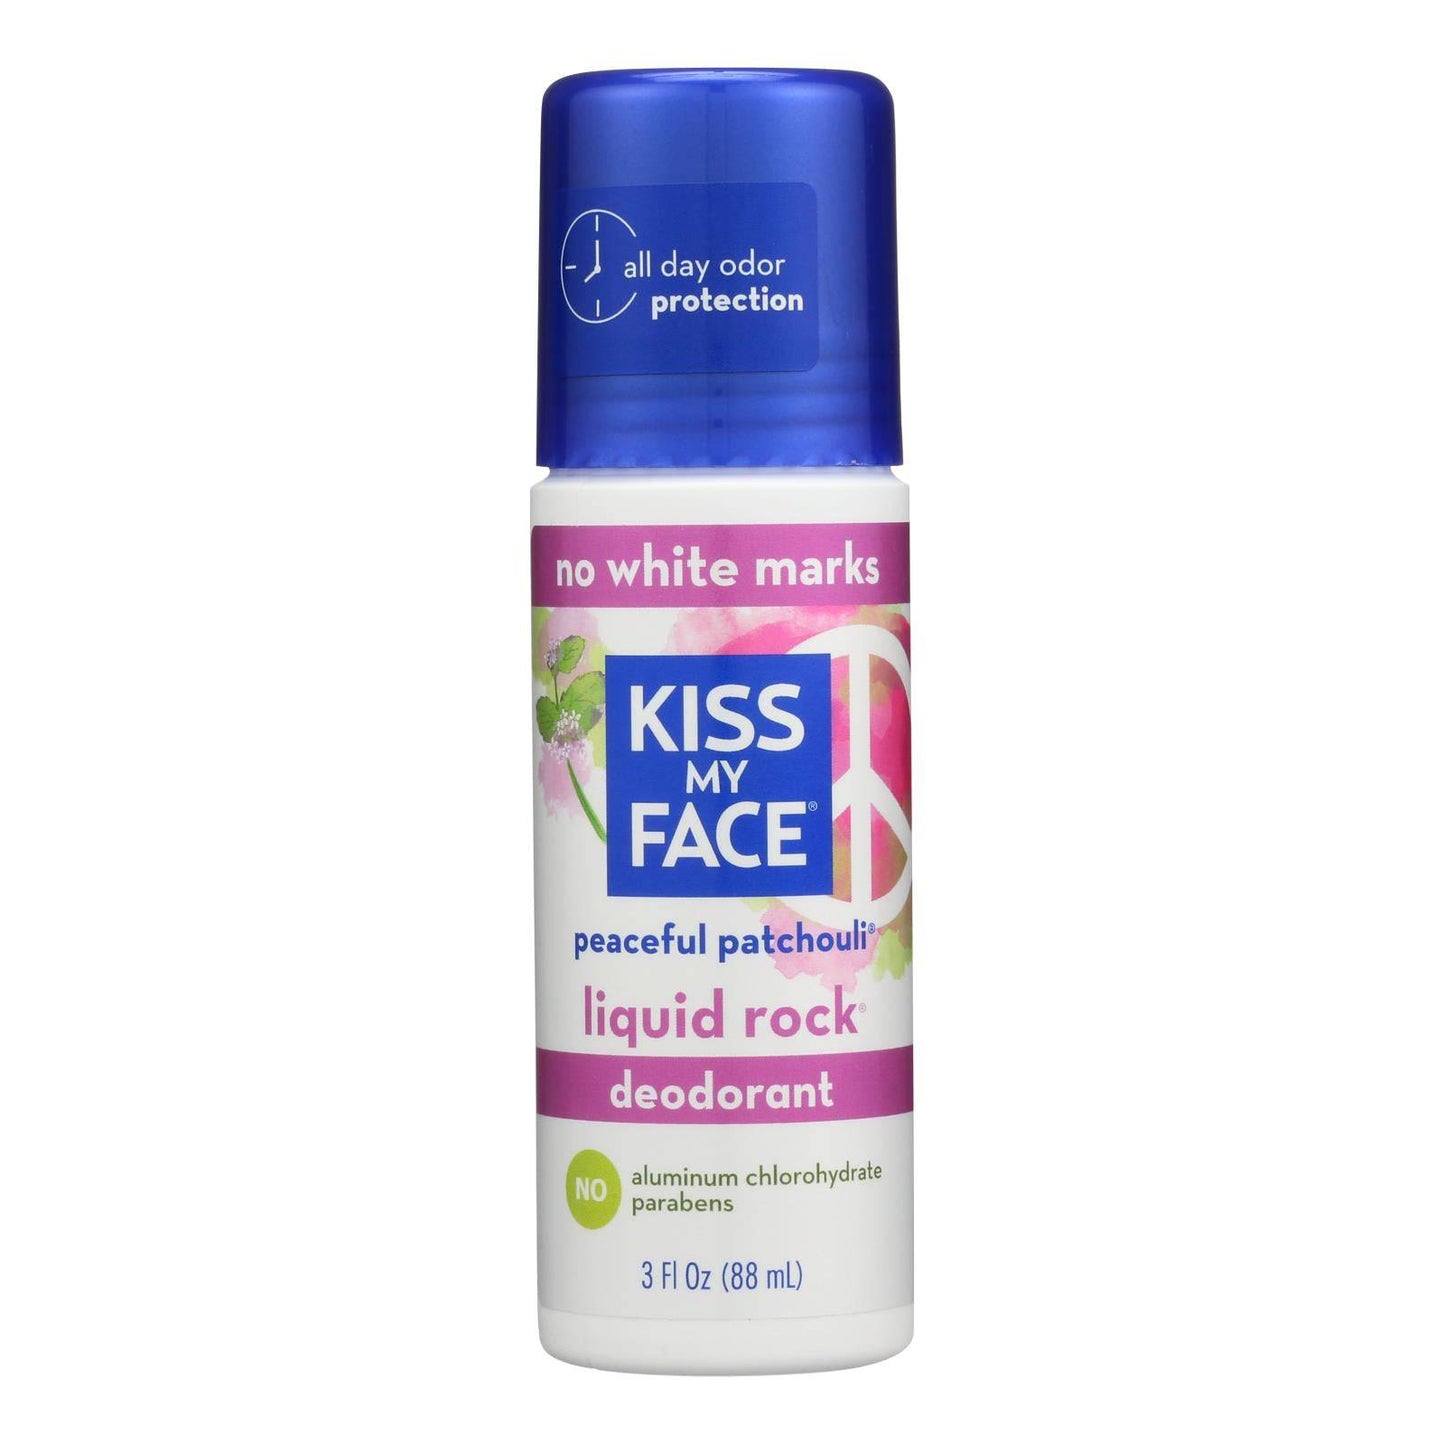 Buy Kiss My Face Deodorant Liquid Rock Roll On Peaceful Patchouli - 3 Fl Oz  at OnlyNaturals.us